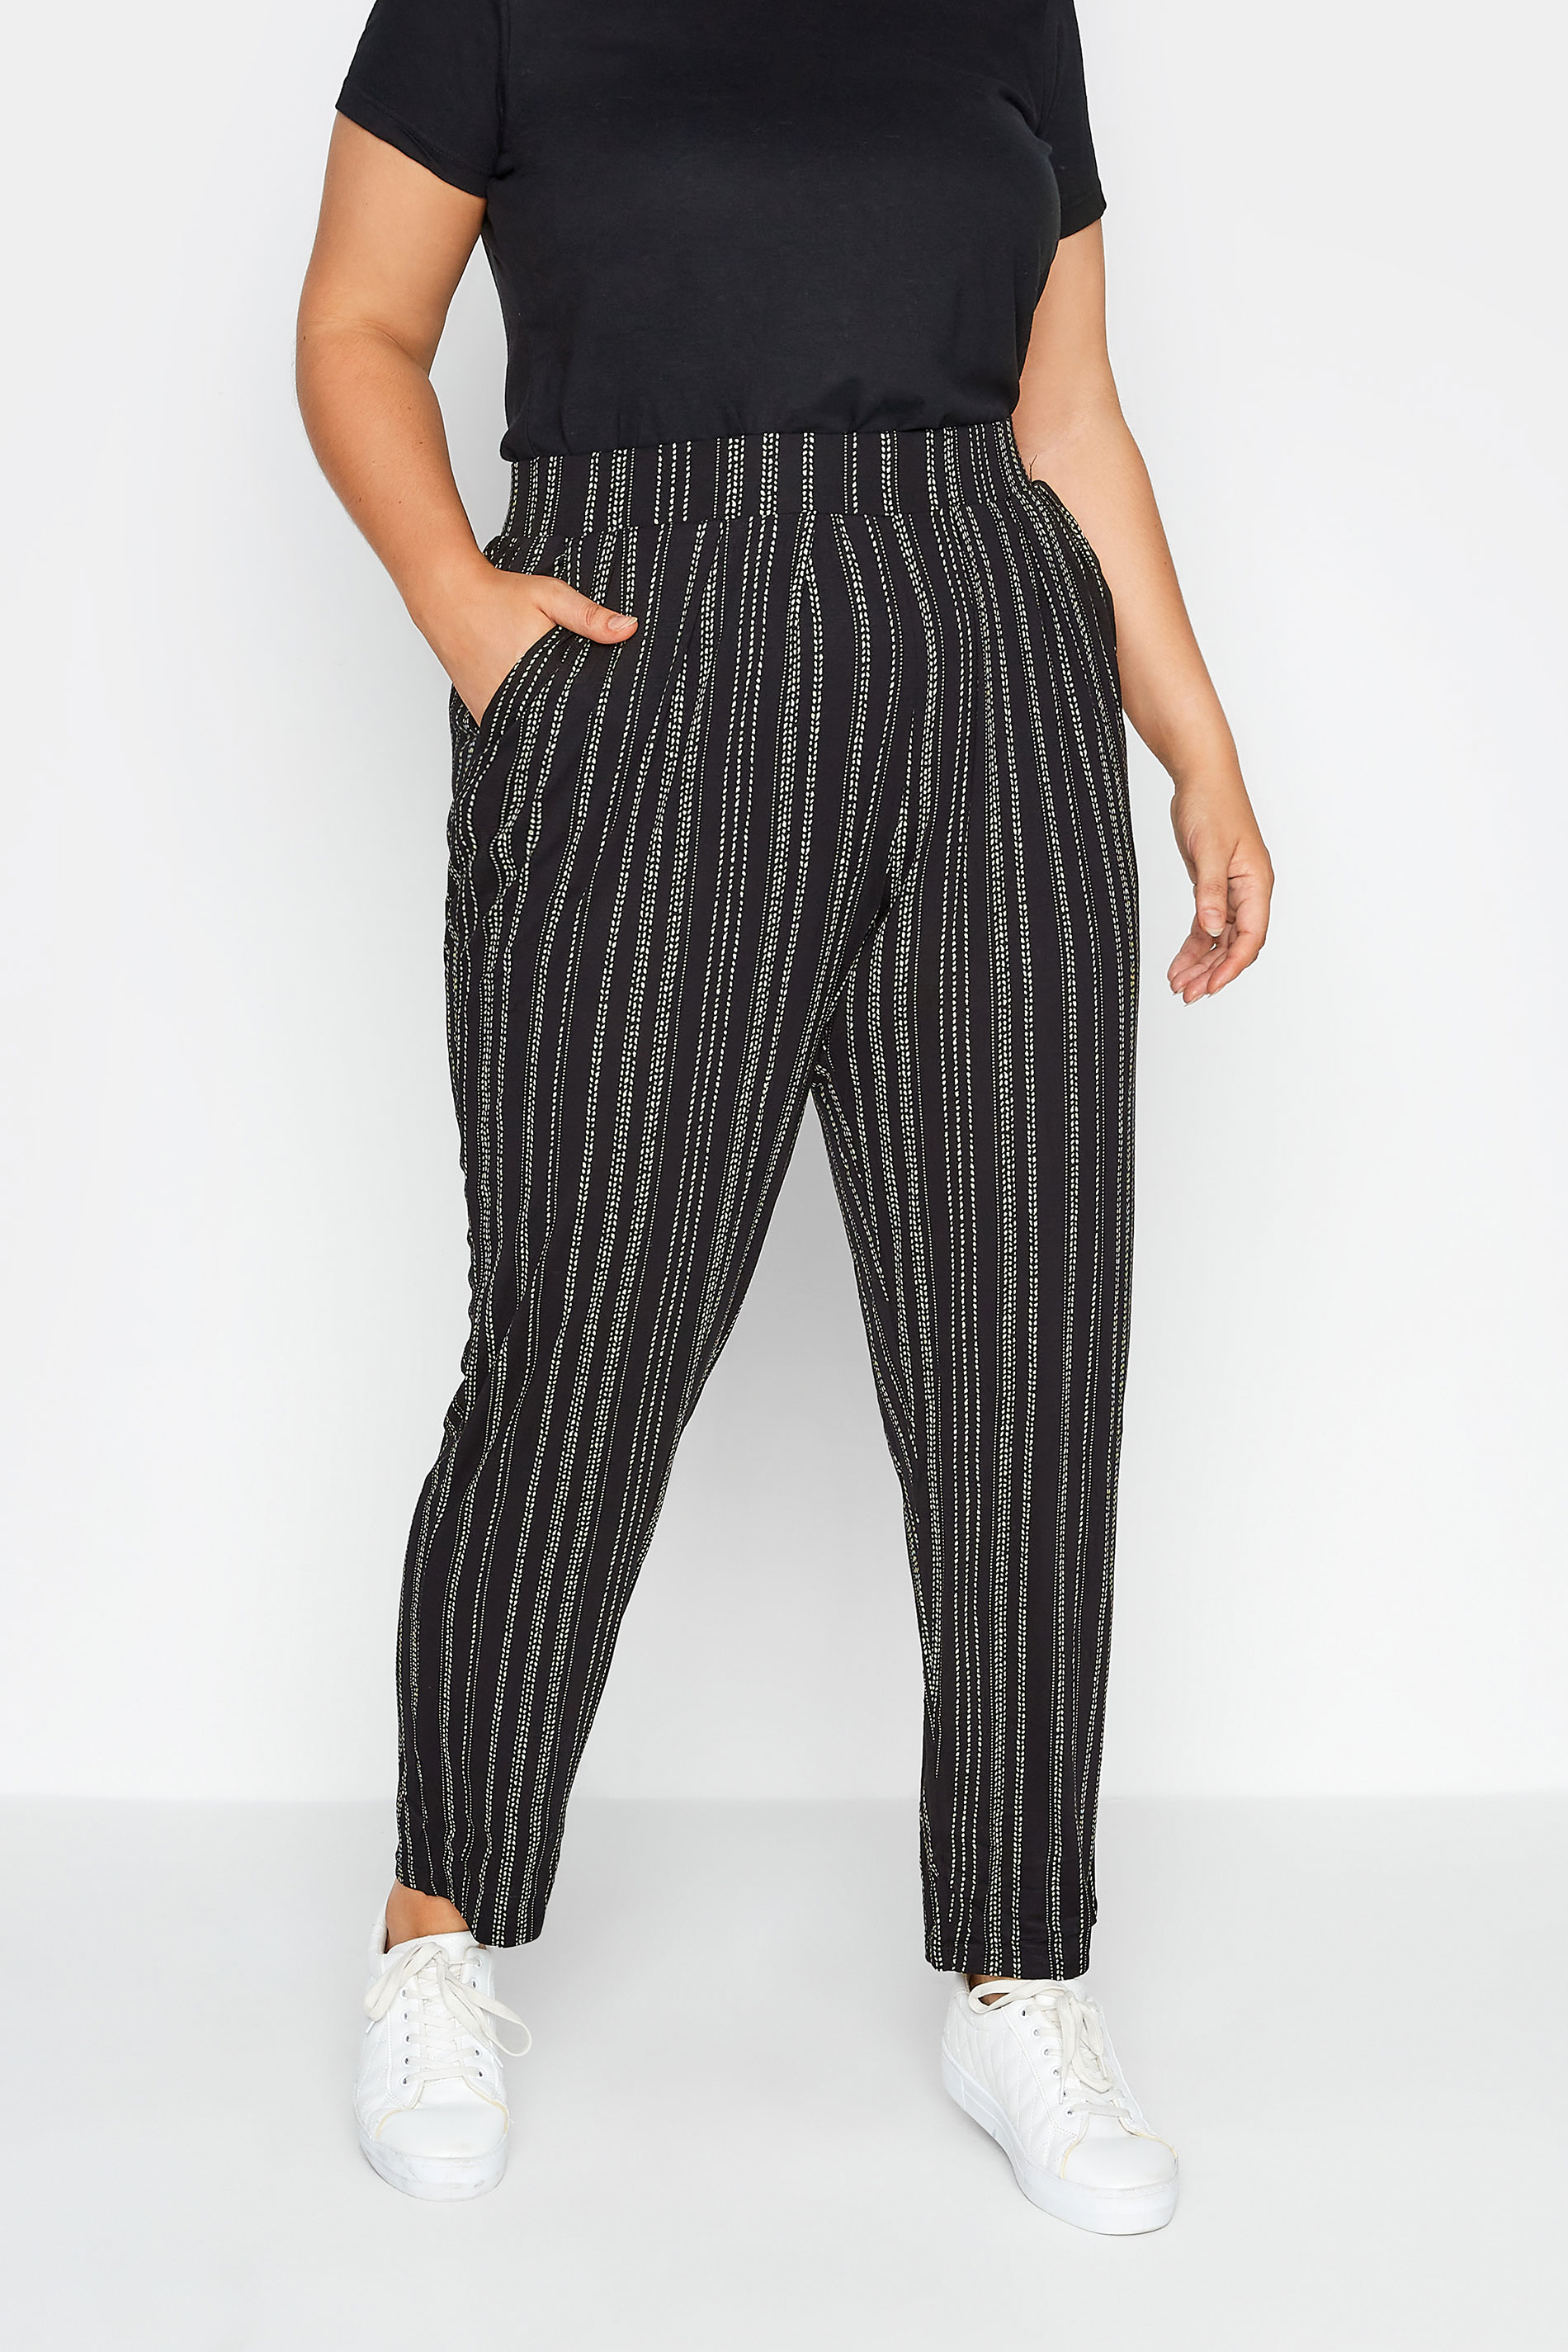 Plus Size Black Stripe Print Trousers | Yours Clothing 1